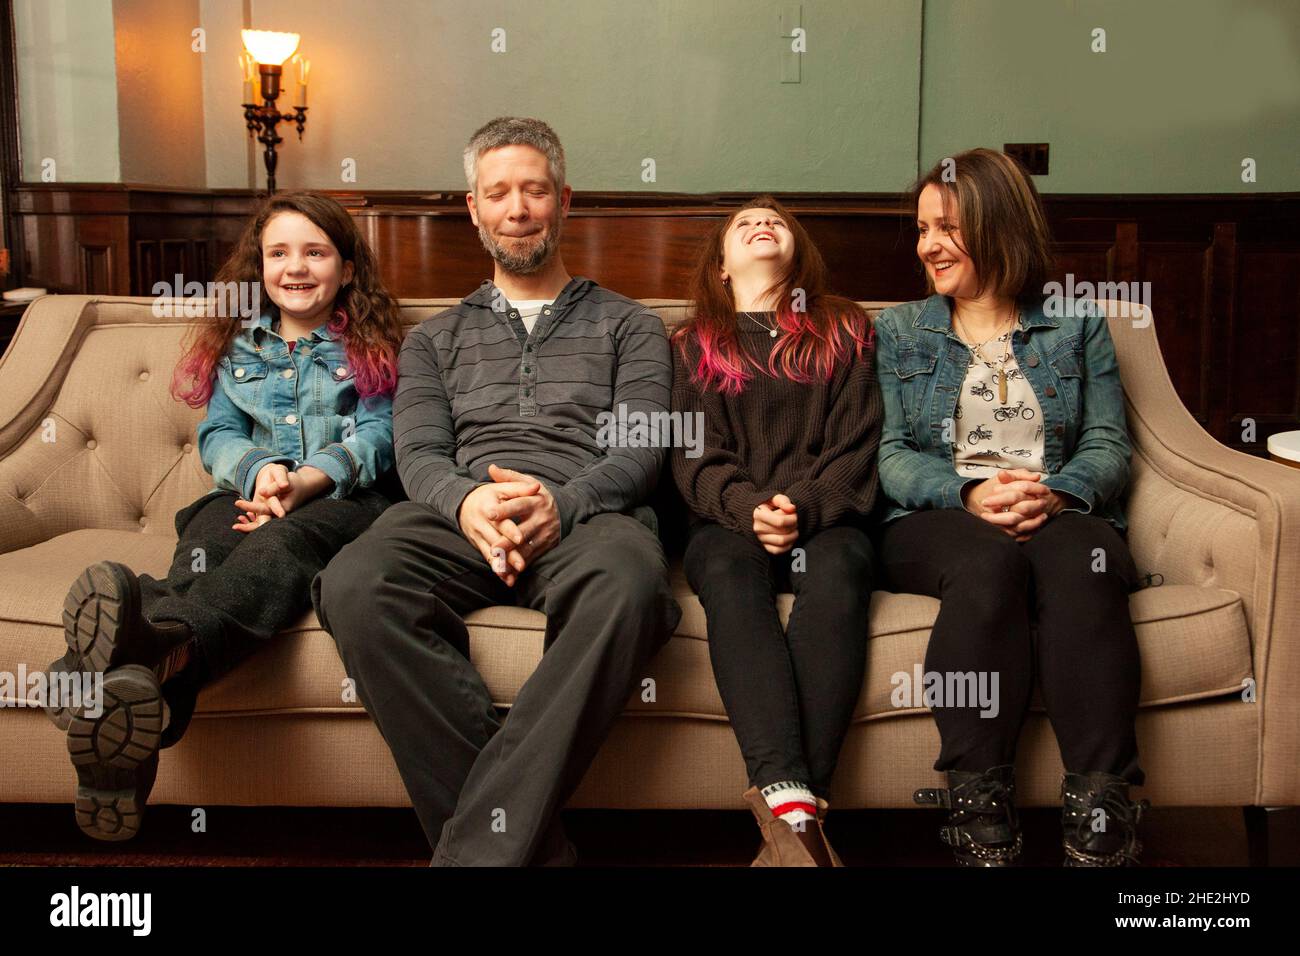 a happy family sitting on their couch having a good hard laugh at something Stock Photo